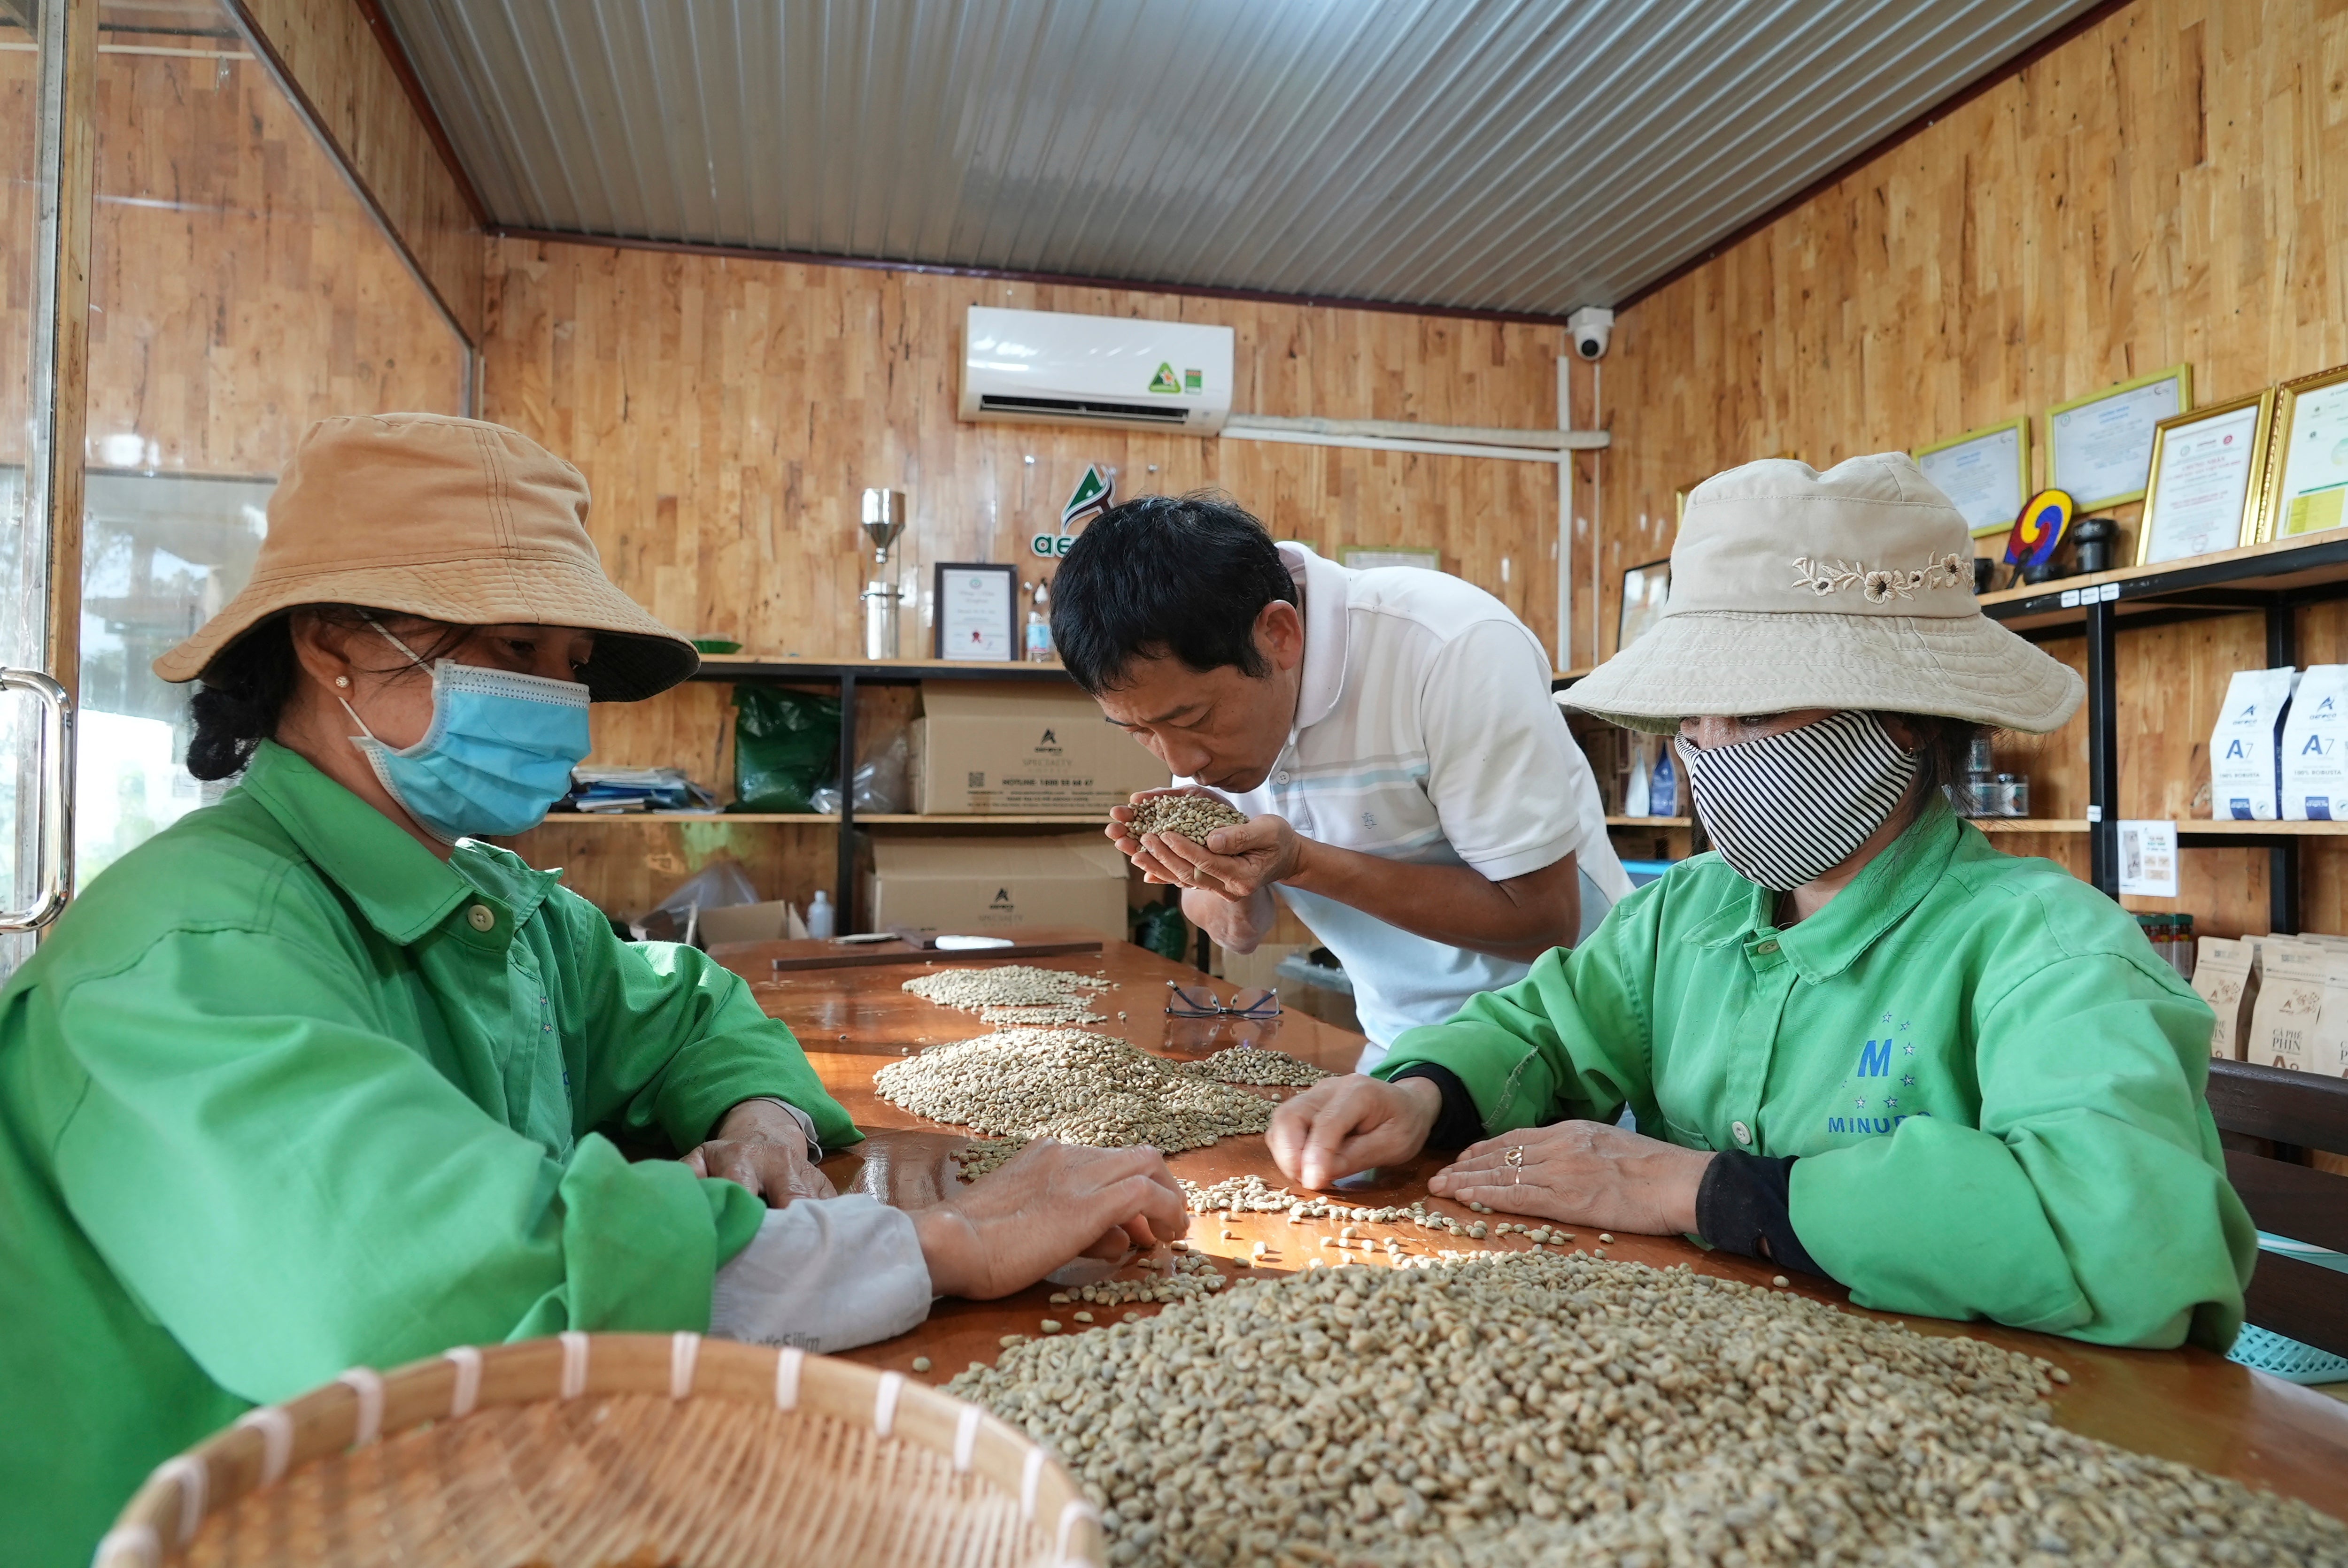 Workers sort and grade coffee beans at a coffee factory in Dak Lak province, Vietnam